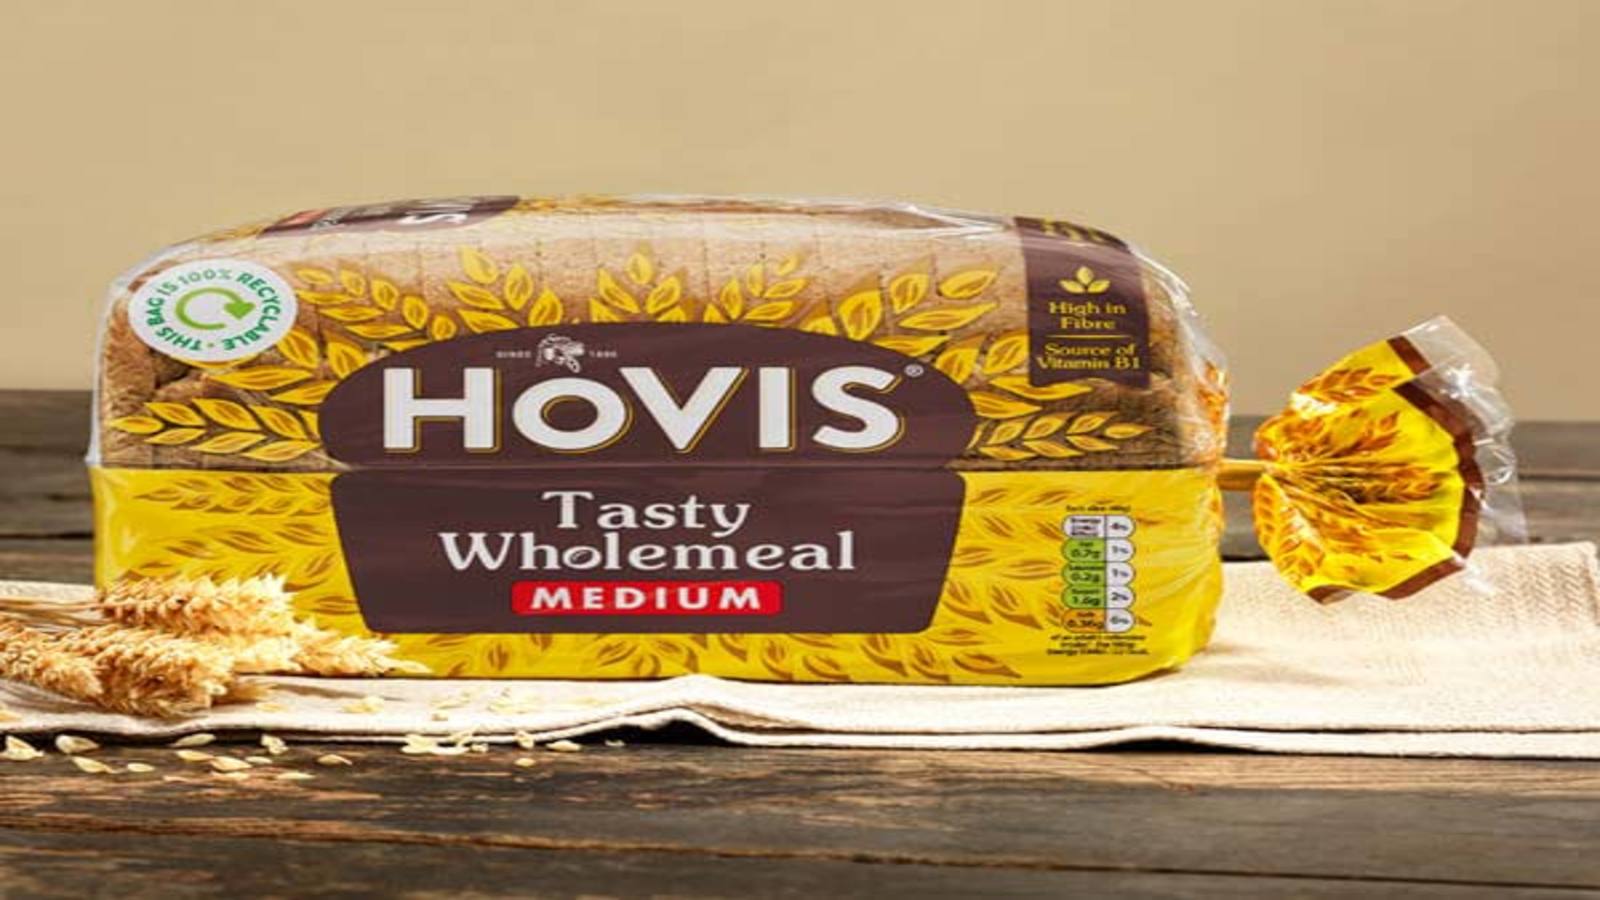 Gores Group, Premier Foods sell UK bakery brand Hovis to Private equity firm Endless